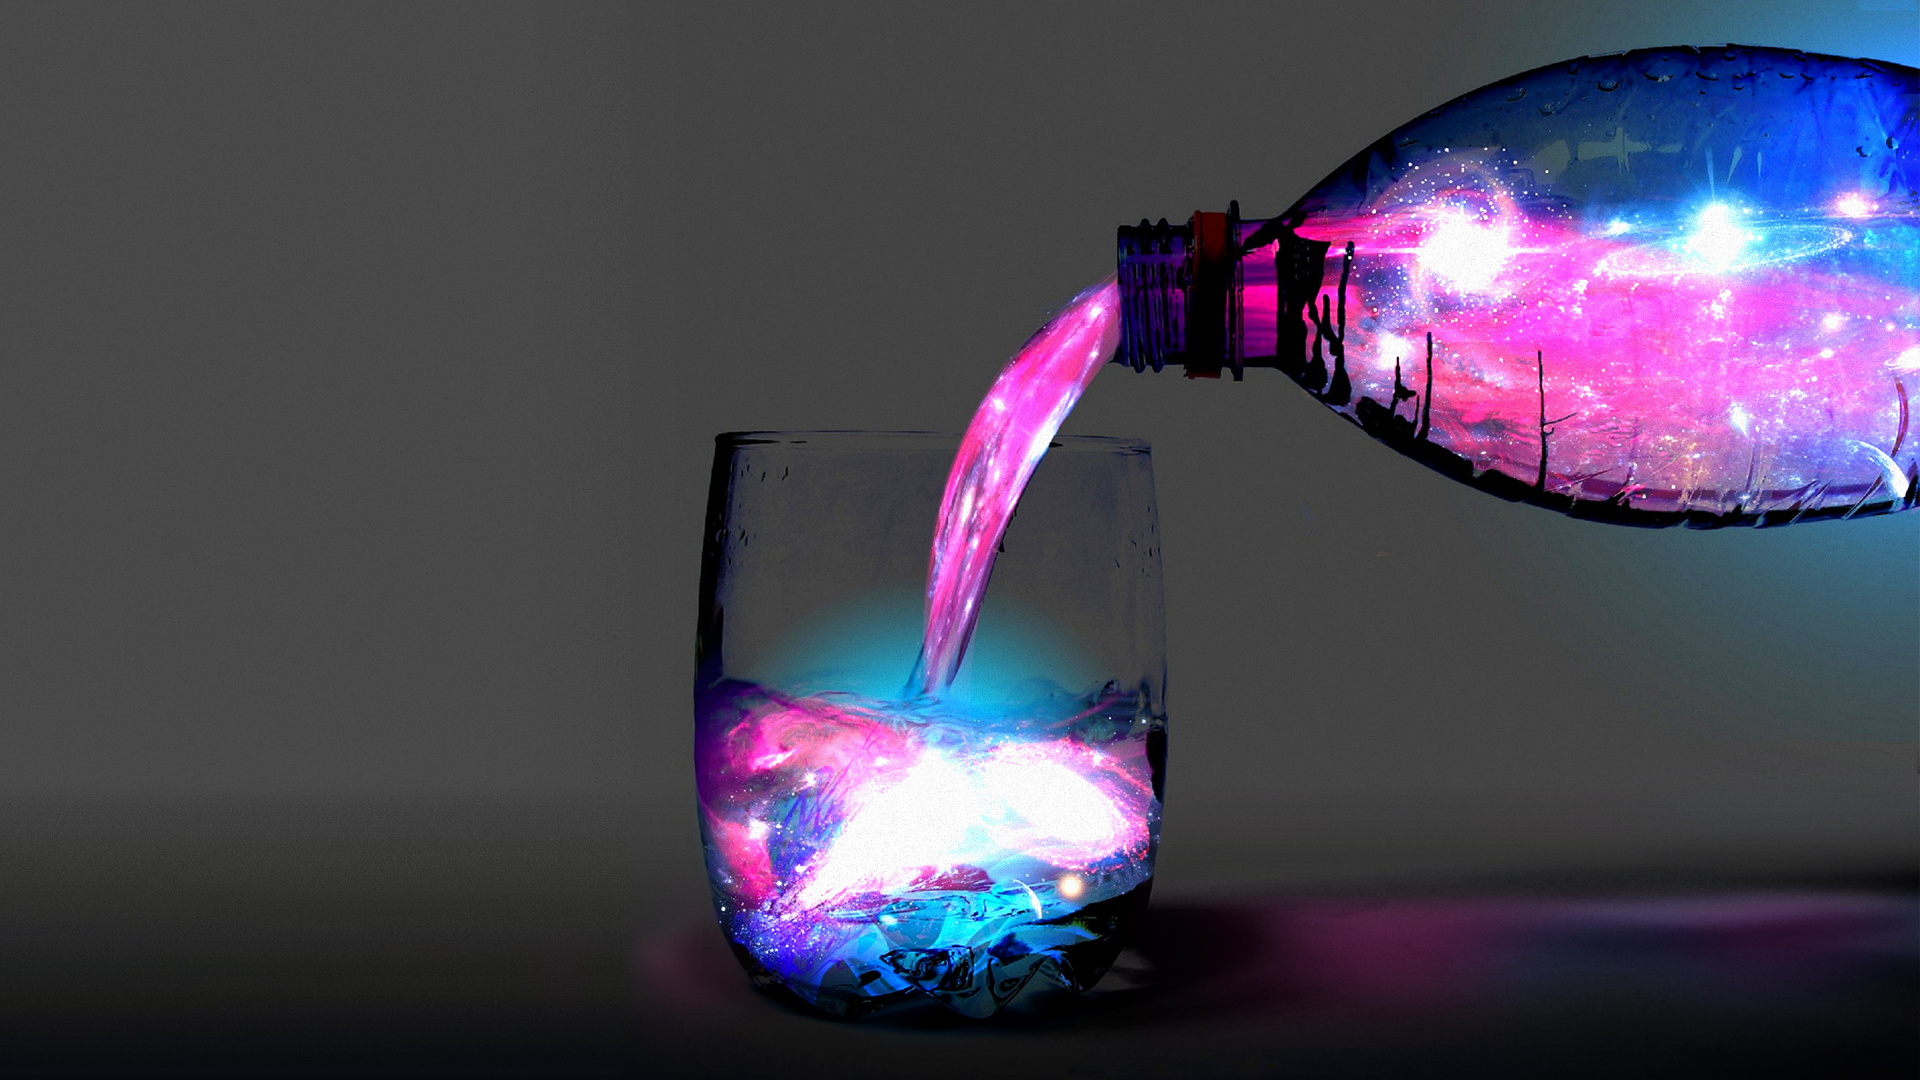 General 1920x1080 abstract digital art bottles liquid galaxy magic water glass colorful drinking glass space artwork simple background space art photo manipulation